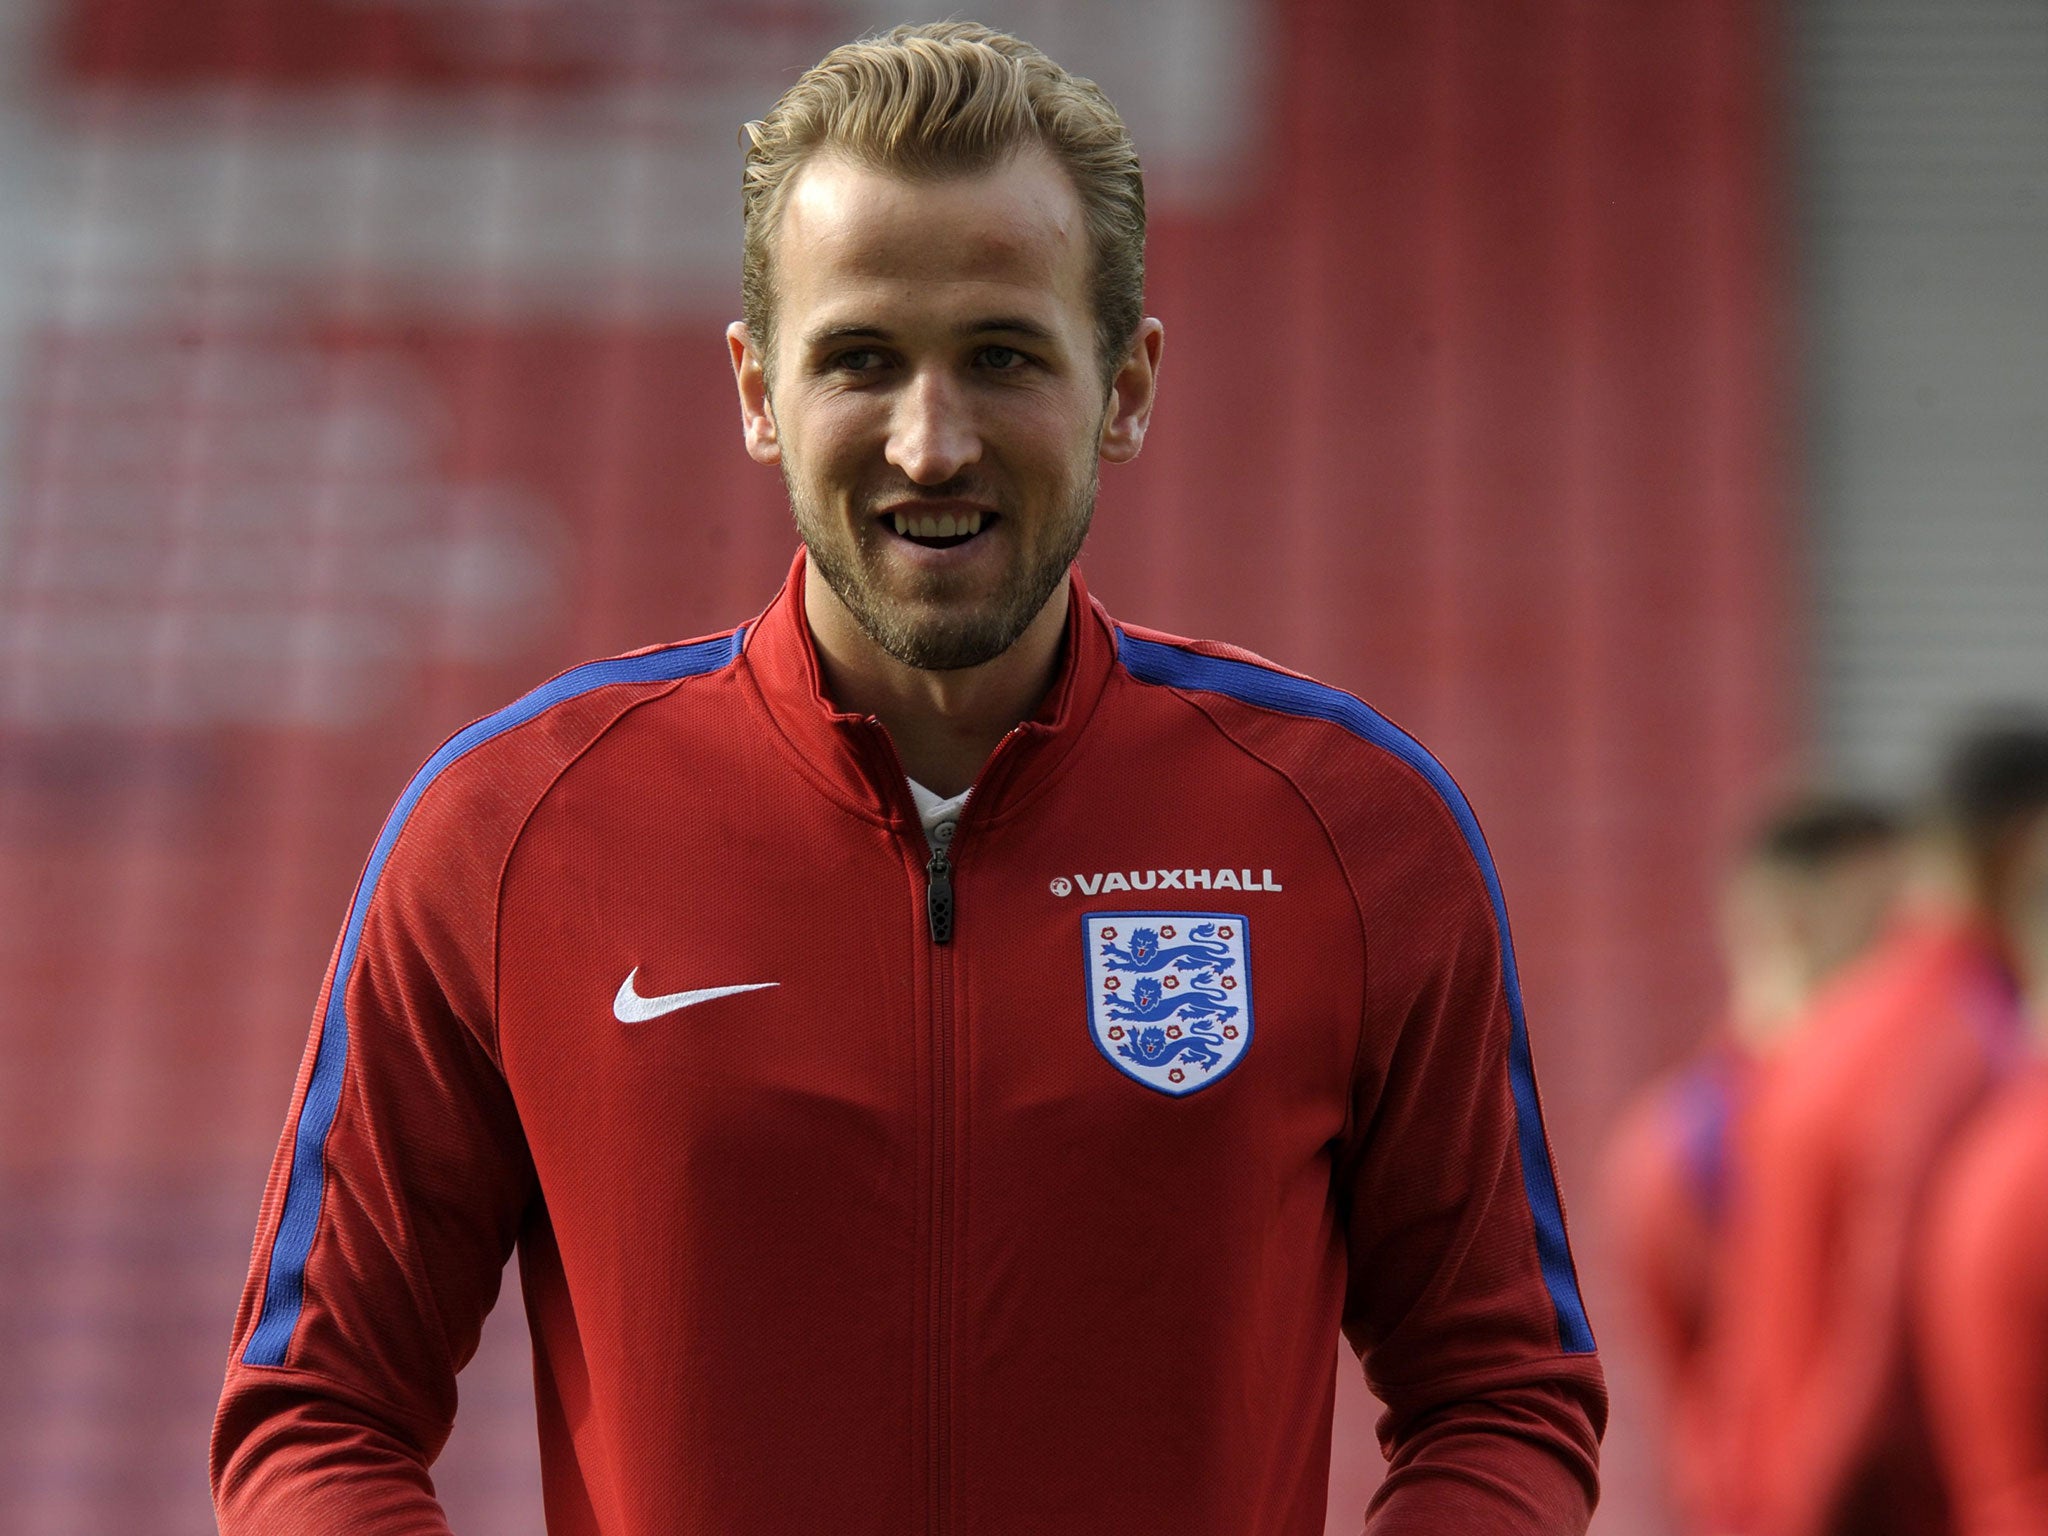 Harry Kane is Gareth Southgate's fifth choice of captain